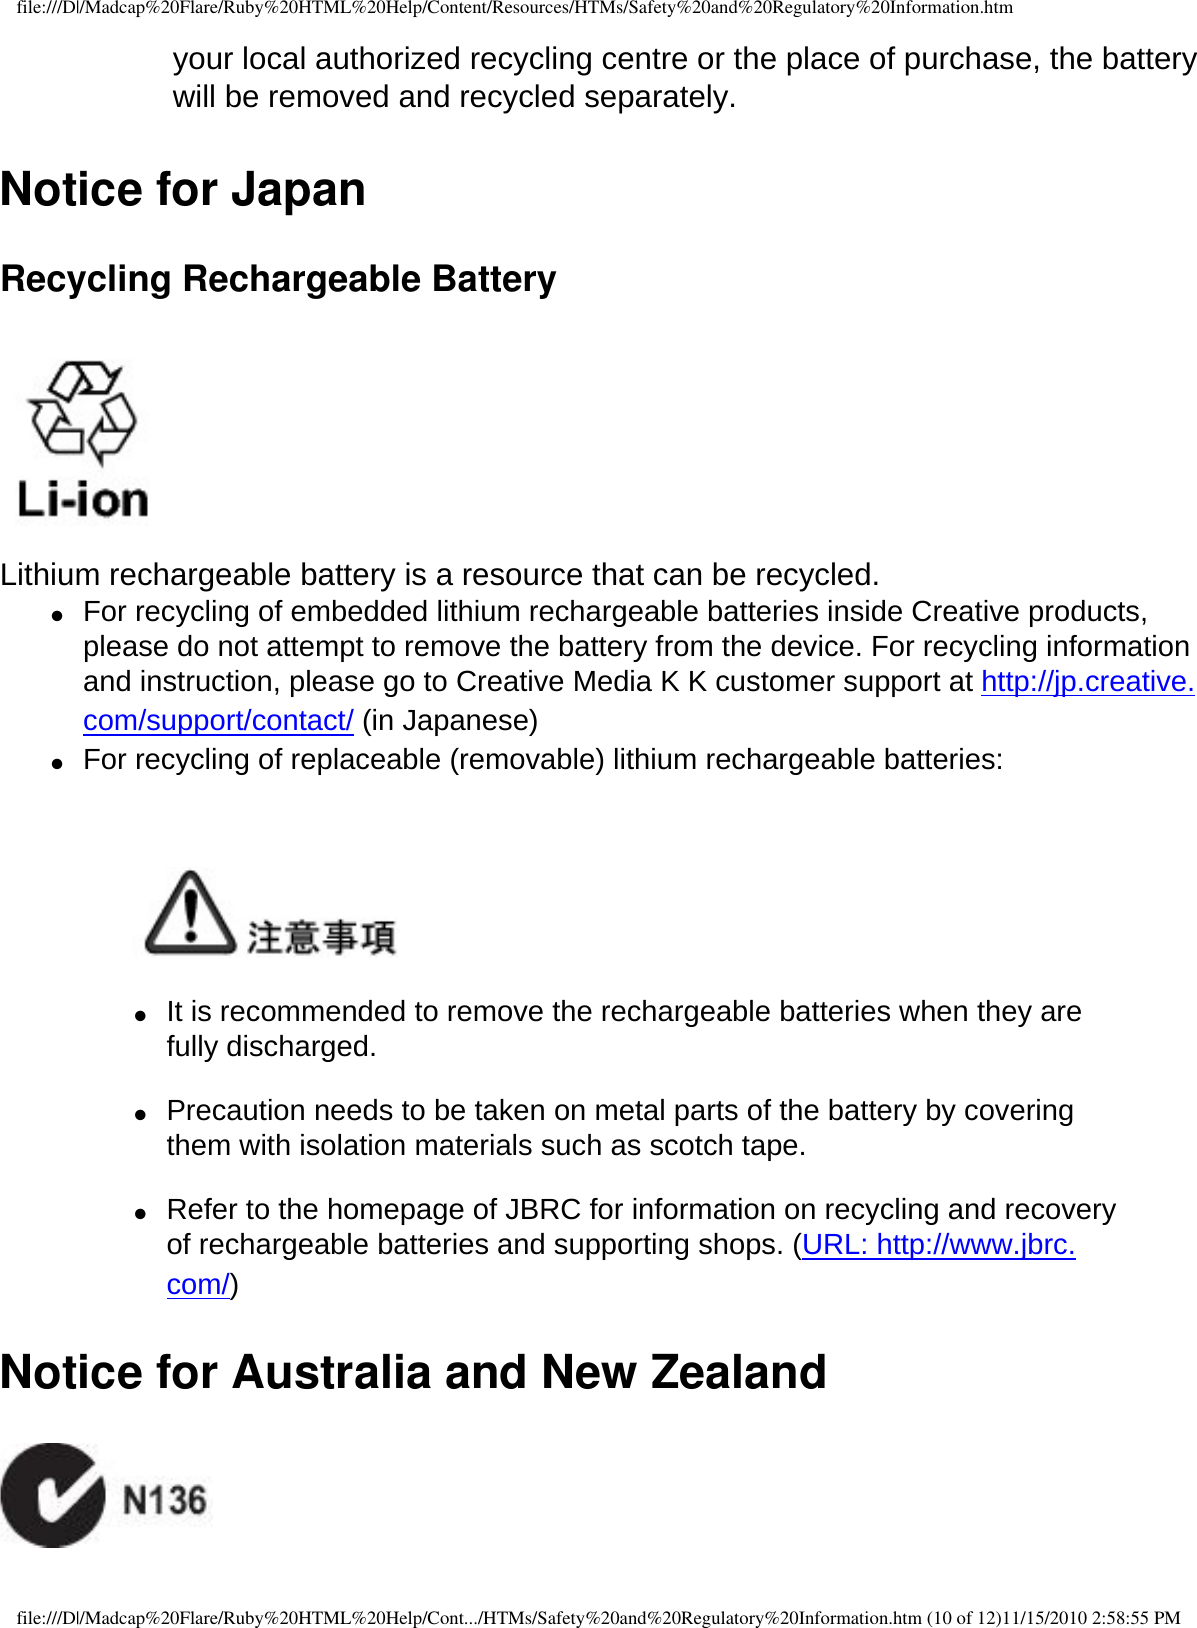 file:///D|/Madcap%20Flare/Ruby%20HTML%20Help/Content/Resources/HTMs/Safety%20and%20Regulatory%20Information.htmyour local authorized recycling centre or the place of purchase, the battery will be removed and recycled separately. Notice for Japan Recycling Rechargeable Battery  Lithium rechargeable battery is a resource that can be recycled. ●     For recycling of embedded lithium rechargeable batteries inside Creative products, please do not attempt to remove the battery from the device. For recycling information and instruction, please go to Creative Media K K customer support at http://jp.creative.com/support/contact/ (in Japanese) ●     For recycling of replaceable (removable) lithium rechargeable batteries:       ●     It is recommended to remove the rechargeable batteries when they are fully discharged.   ●     Precaution needs to be taken on metal parts of the battery by covering them with isolation materials such as scotch tape.   ●     Refer to the homepage of JBRC for information on recycling and recovery of rechargeable batteries and supporting shops. (URL: http://www.jbrc.com/) Notice for Australia and New Zealand  file:///D|/Madcap%20Flare/Ruby%20HTML%20Help/Cont.../HTMs/Safety%20and%20Regulatory%20Information.htm (10 of 12)11/15/2010 2:58:55 PM